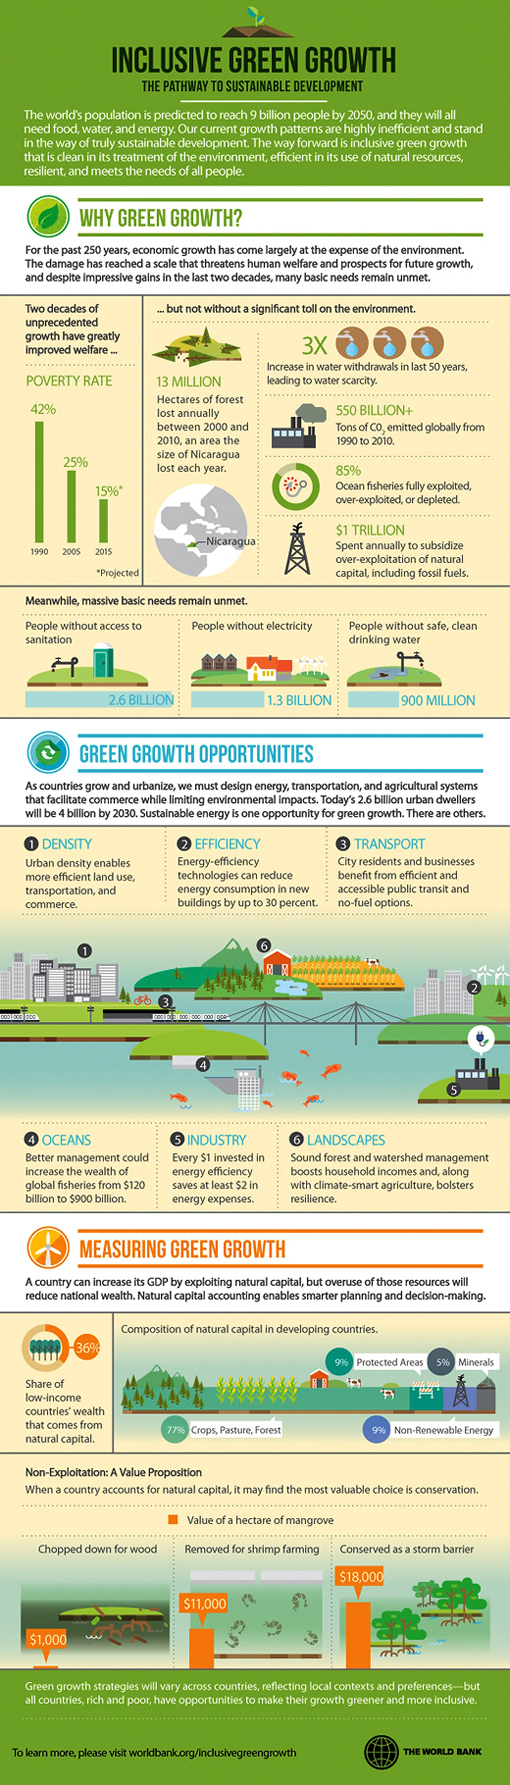 infographic-green-growth-510x1785